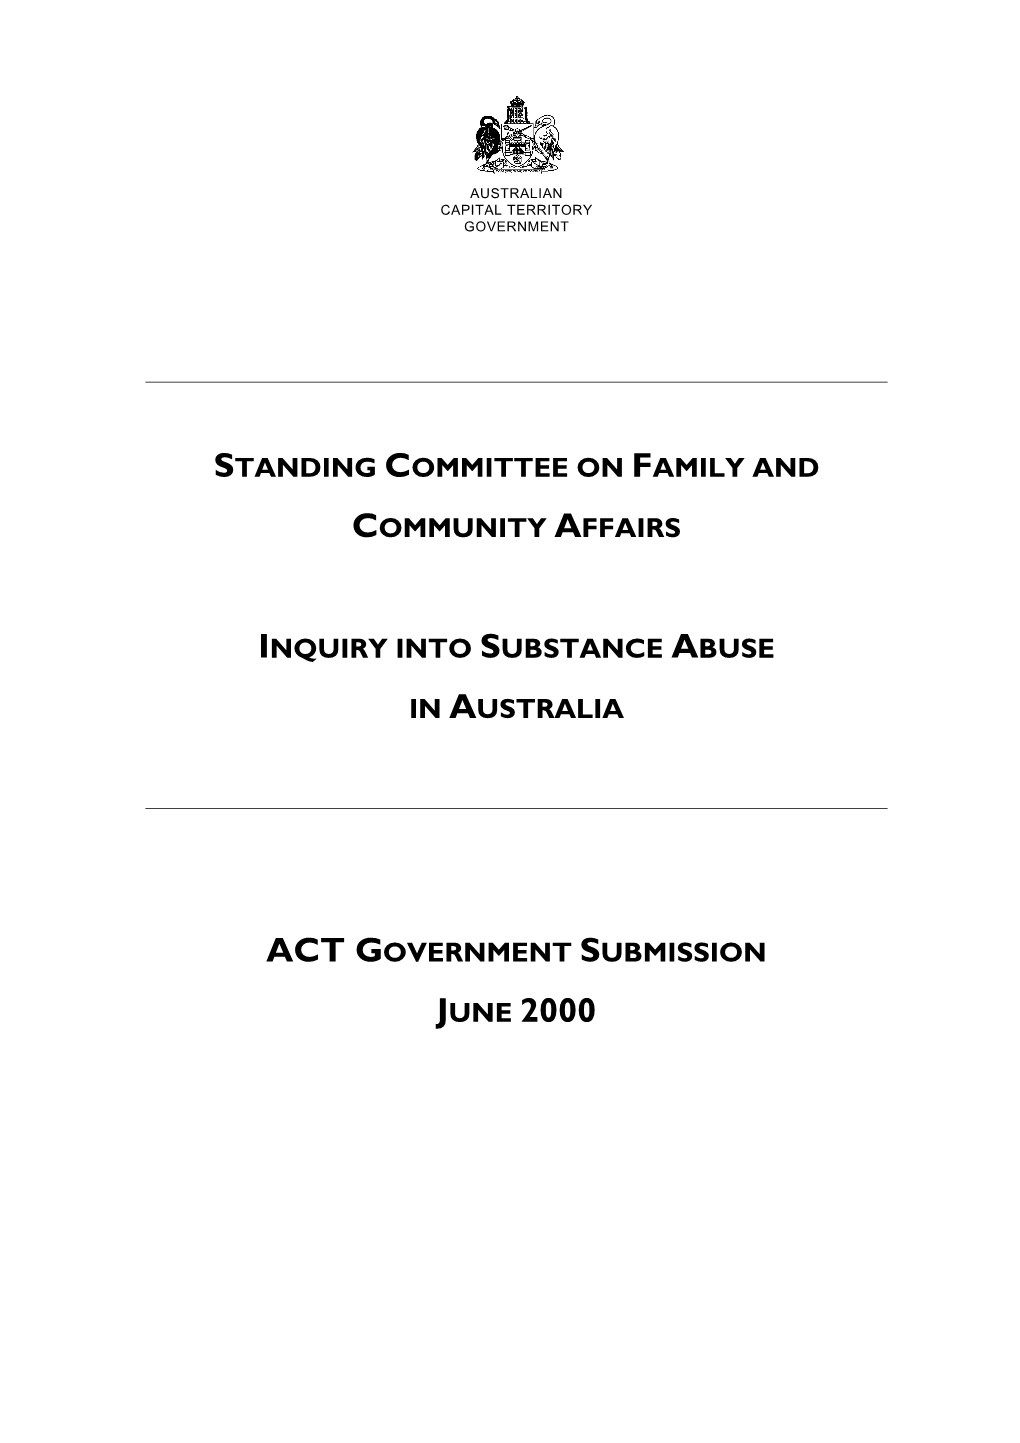 Standing Committee on Family and Community Affairs